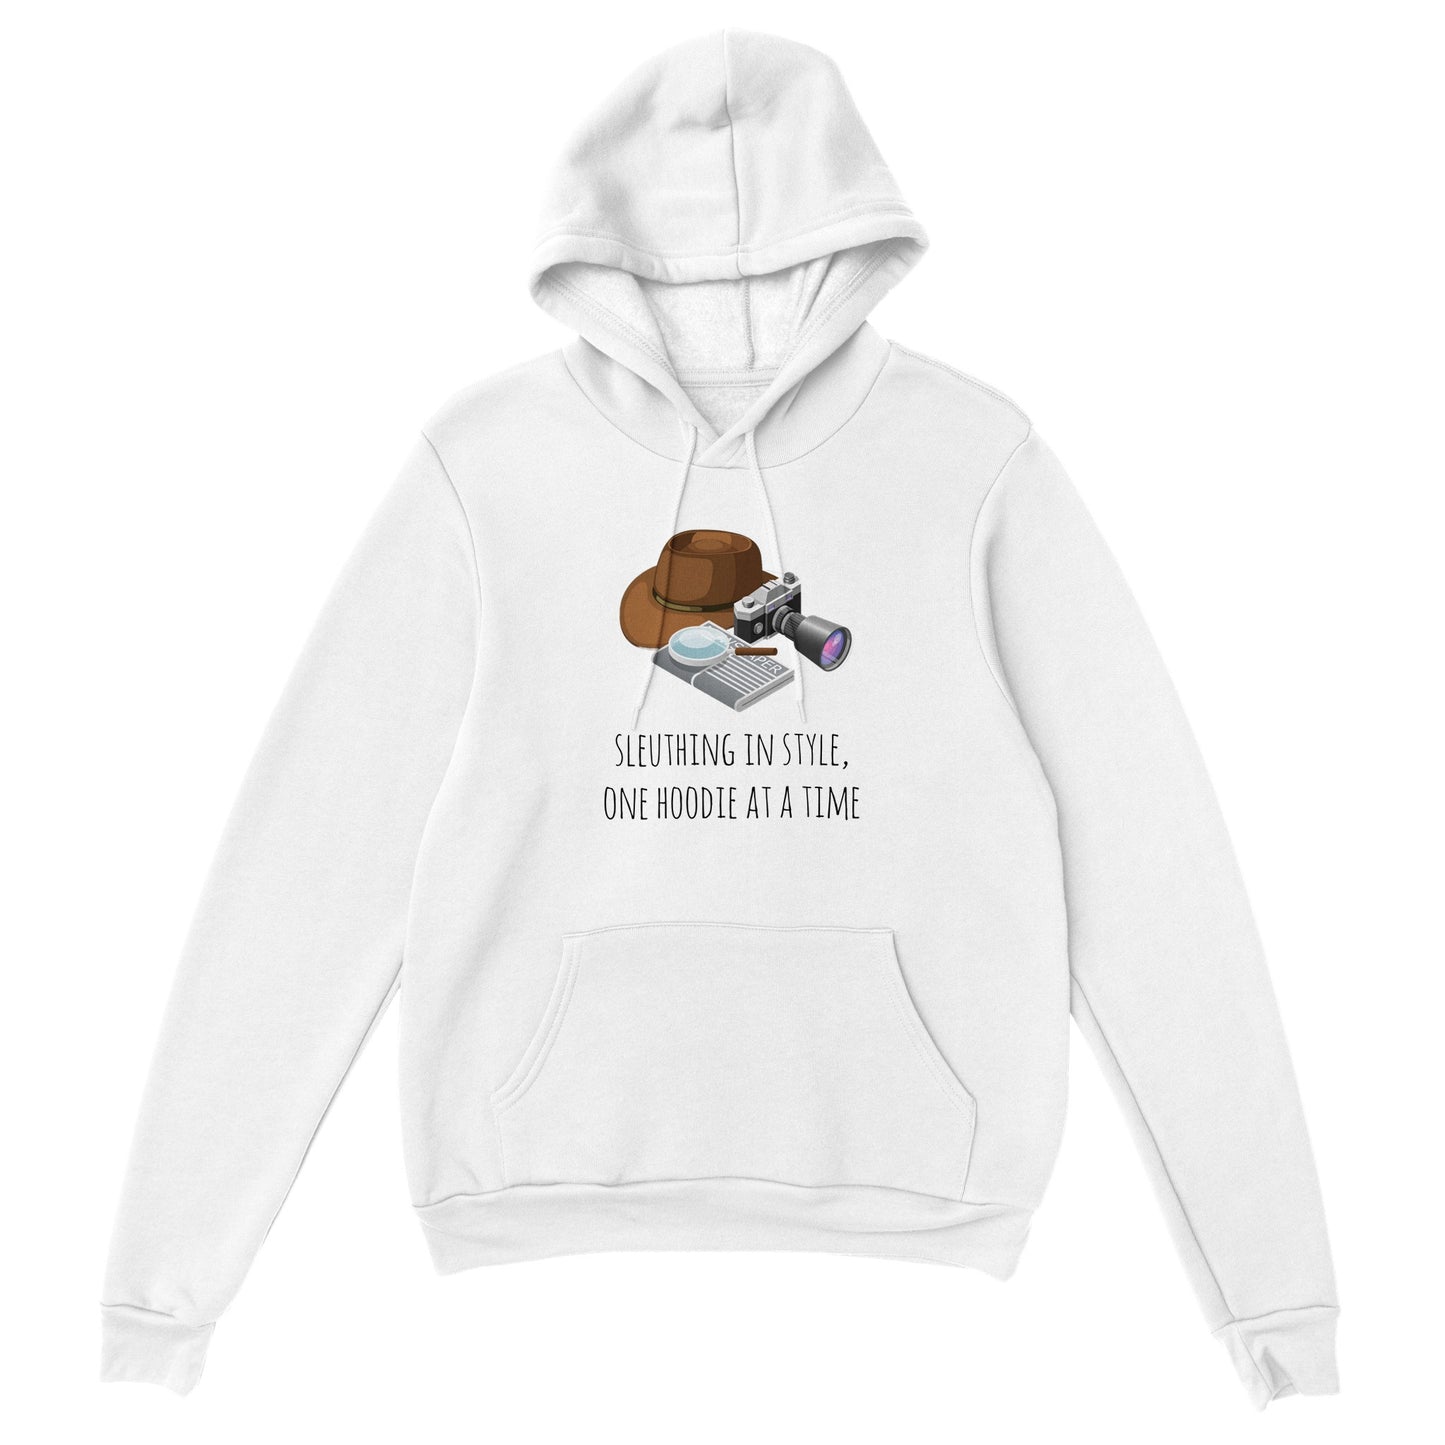 Classic Unisex Pullover Hoodie - Sleuthing In Style, One Hoodie At A Time.